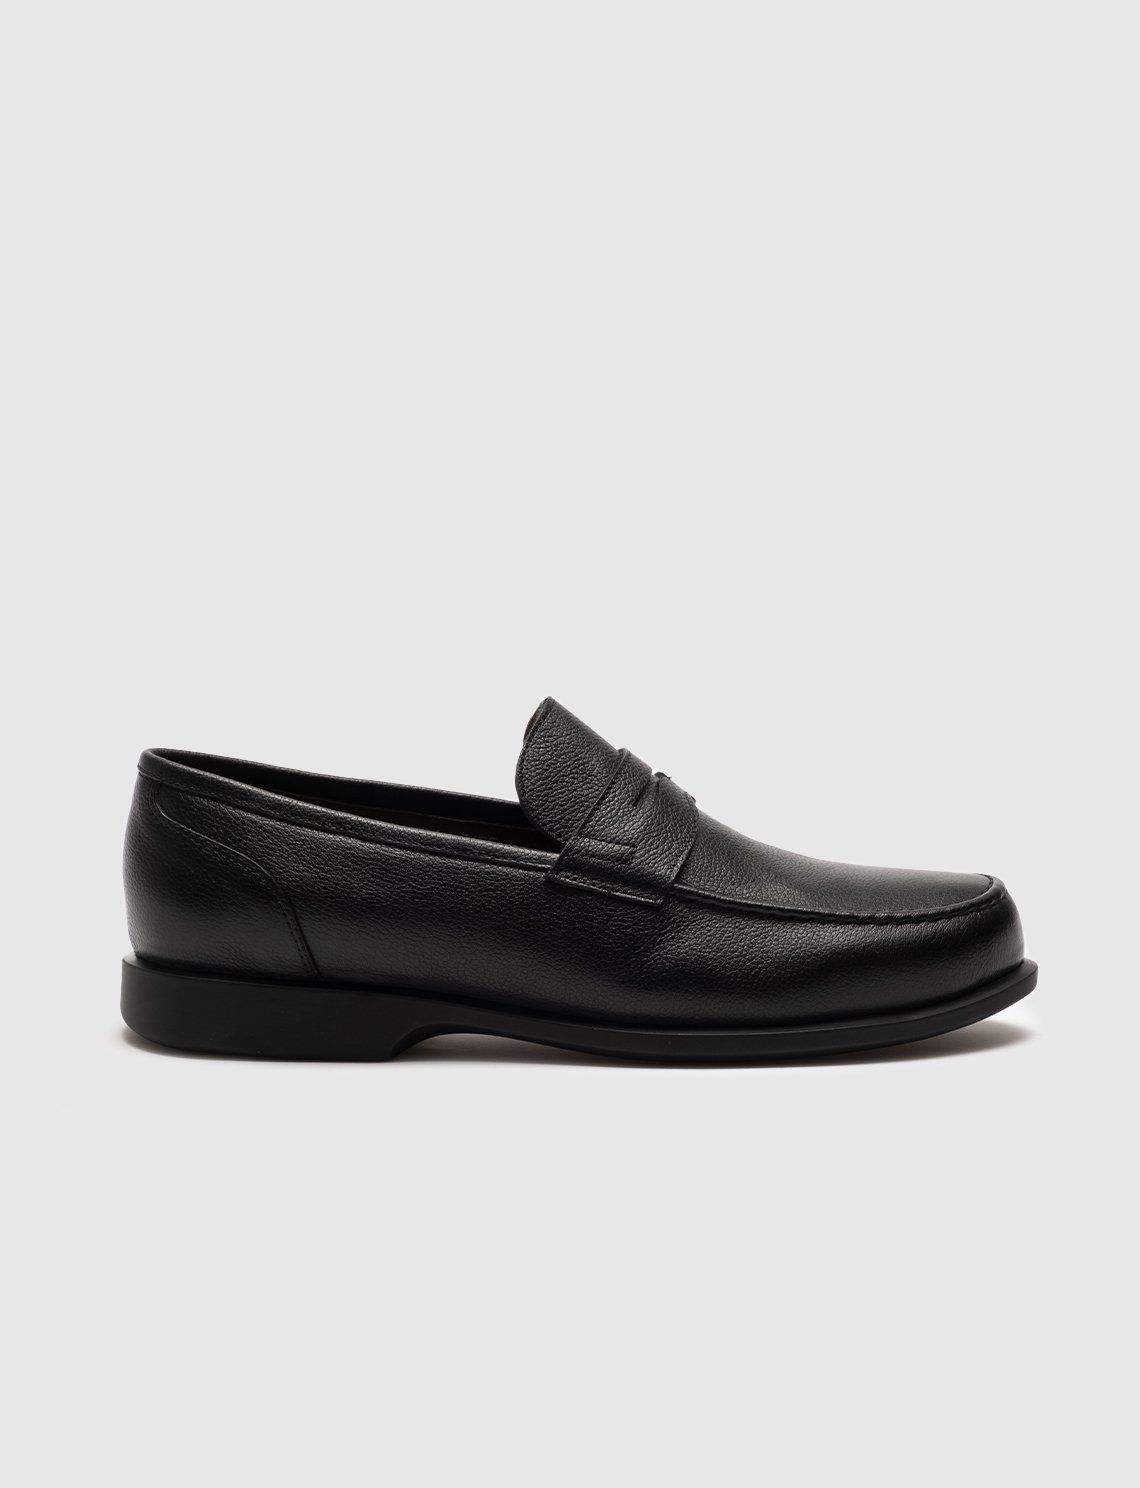 Men Genuine Leather Round Toe Penny Loafers